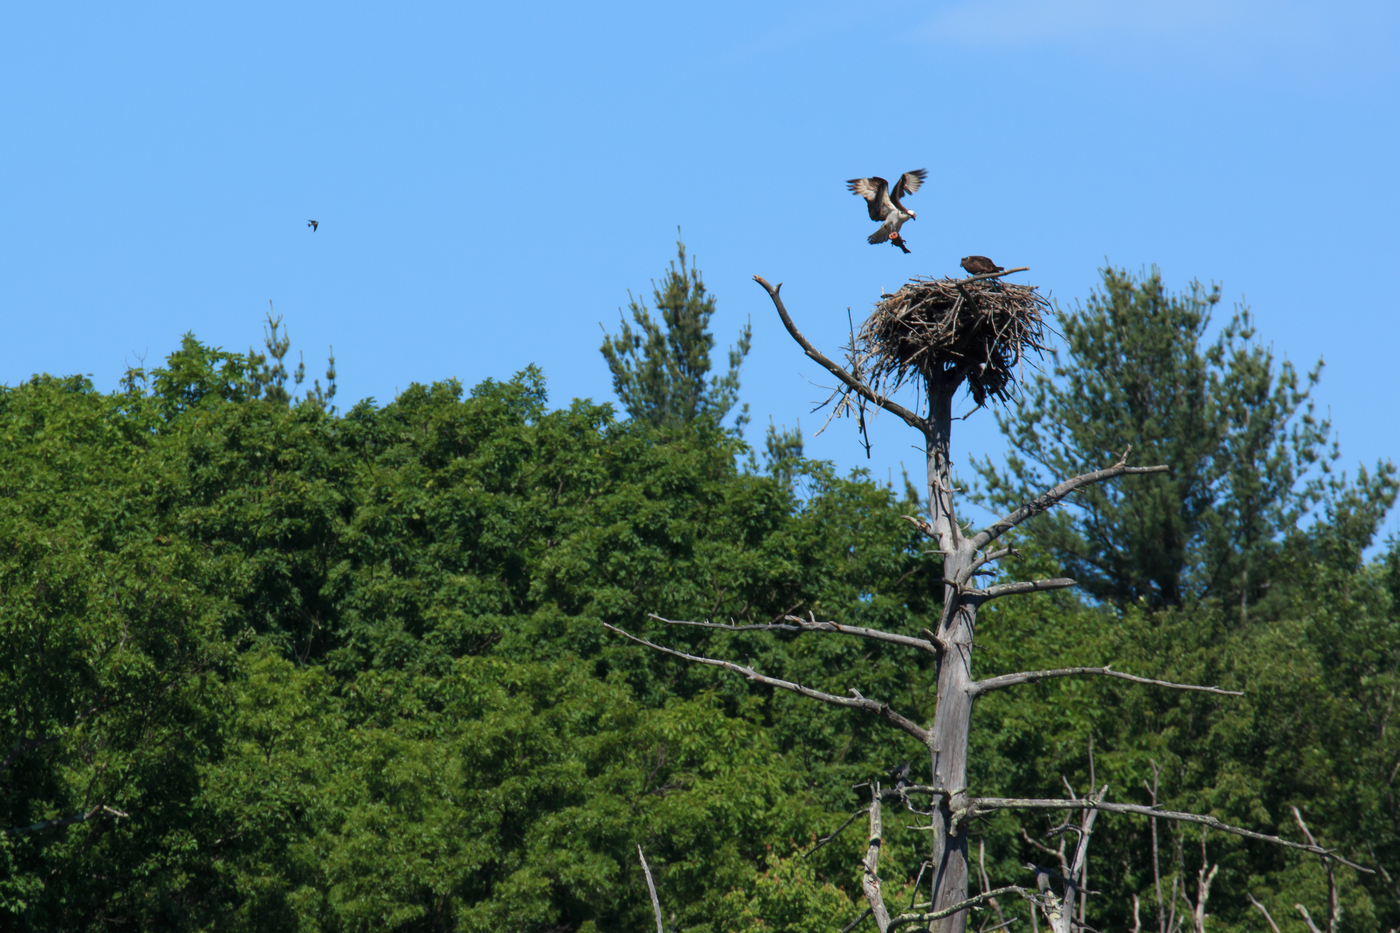 Opsrey landing on a nest with another osprey in the nest